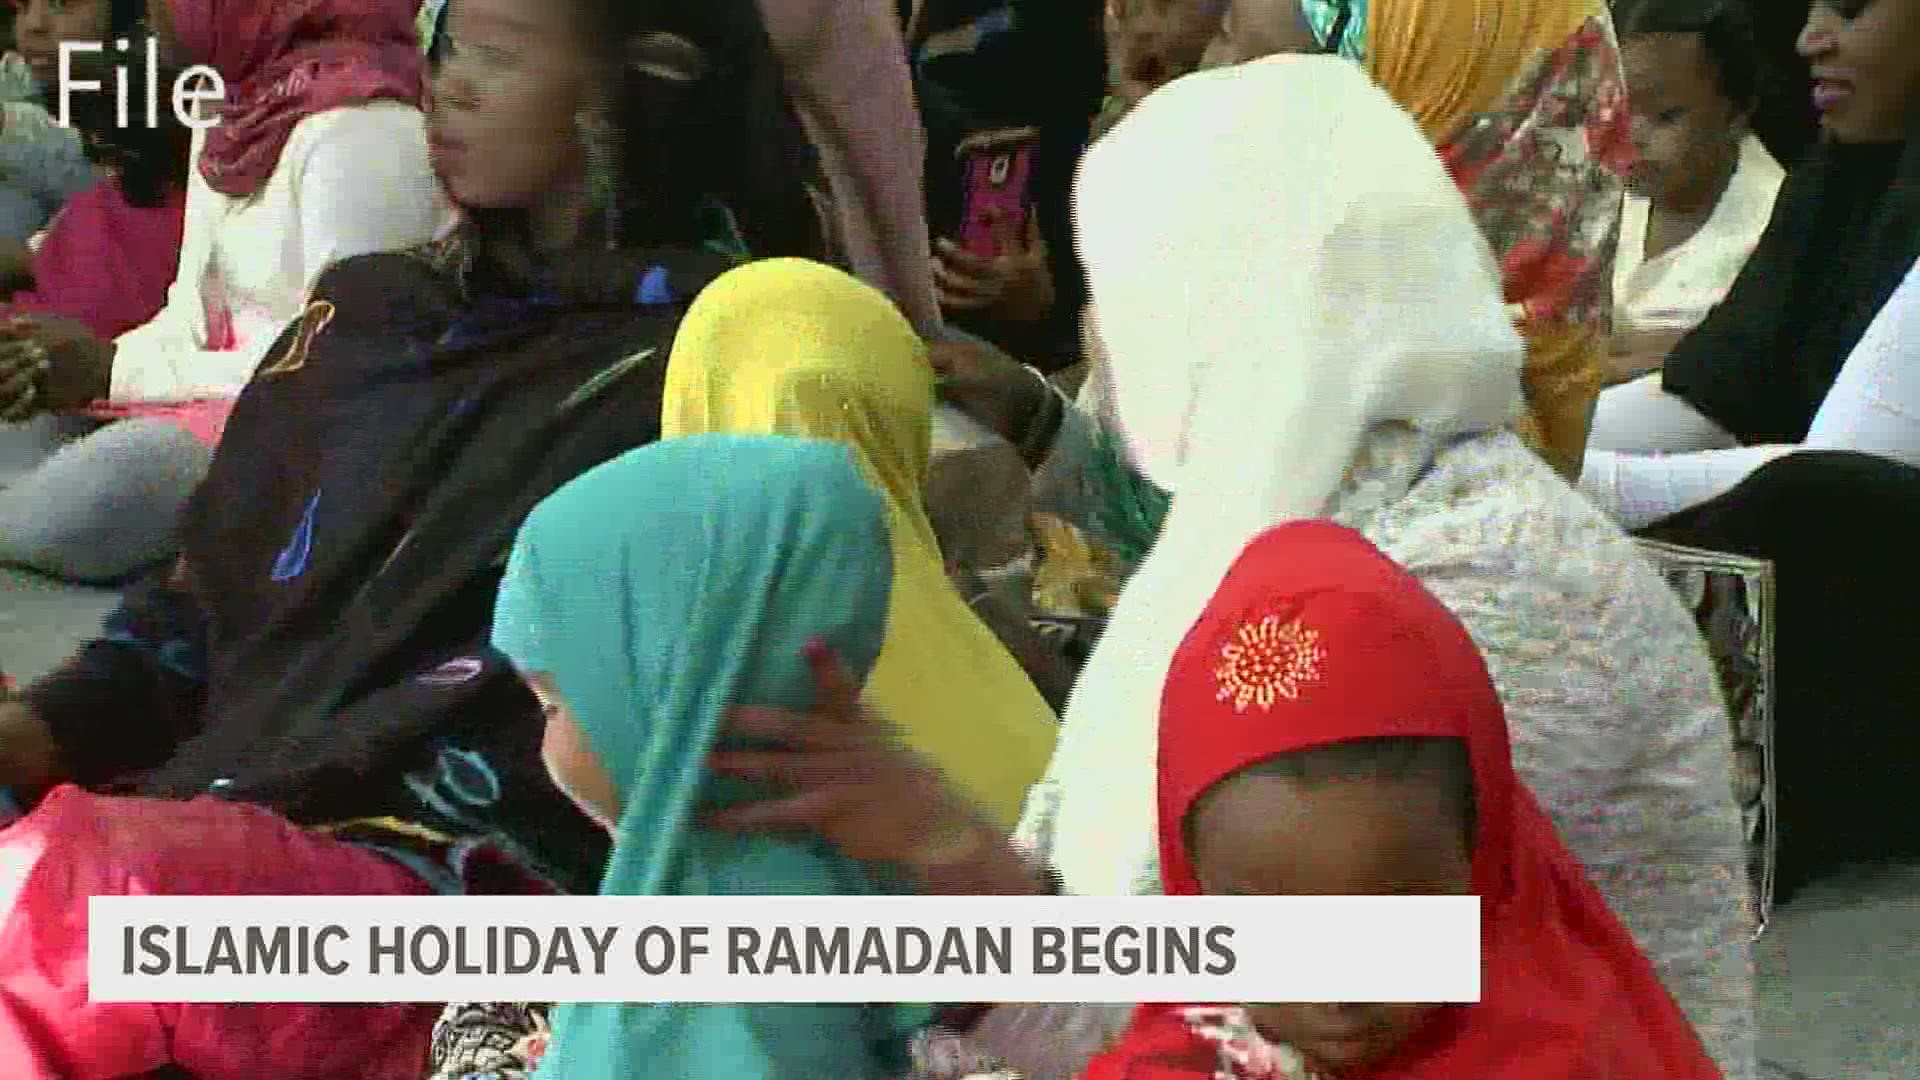 News8's David Bohlman sat down with Imam Bachir Djehiche from the Islamic Center as the community begins one of its most important holiday seasons.